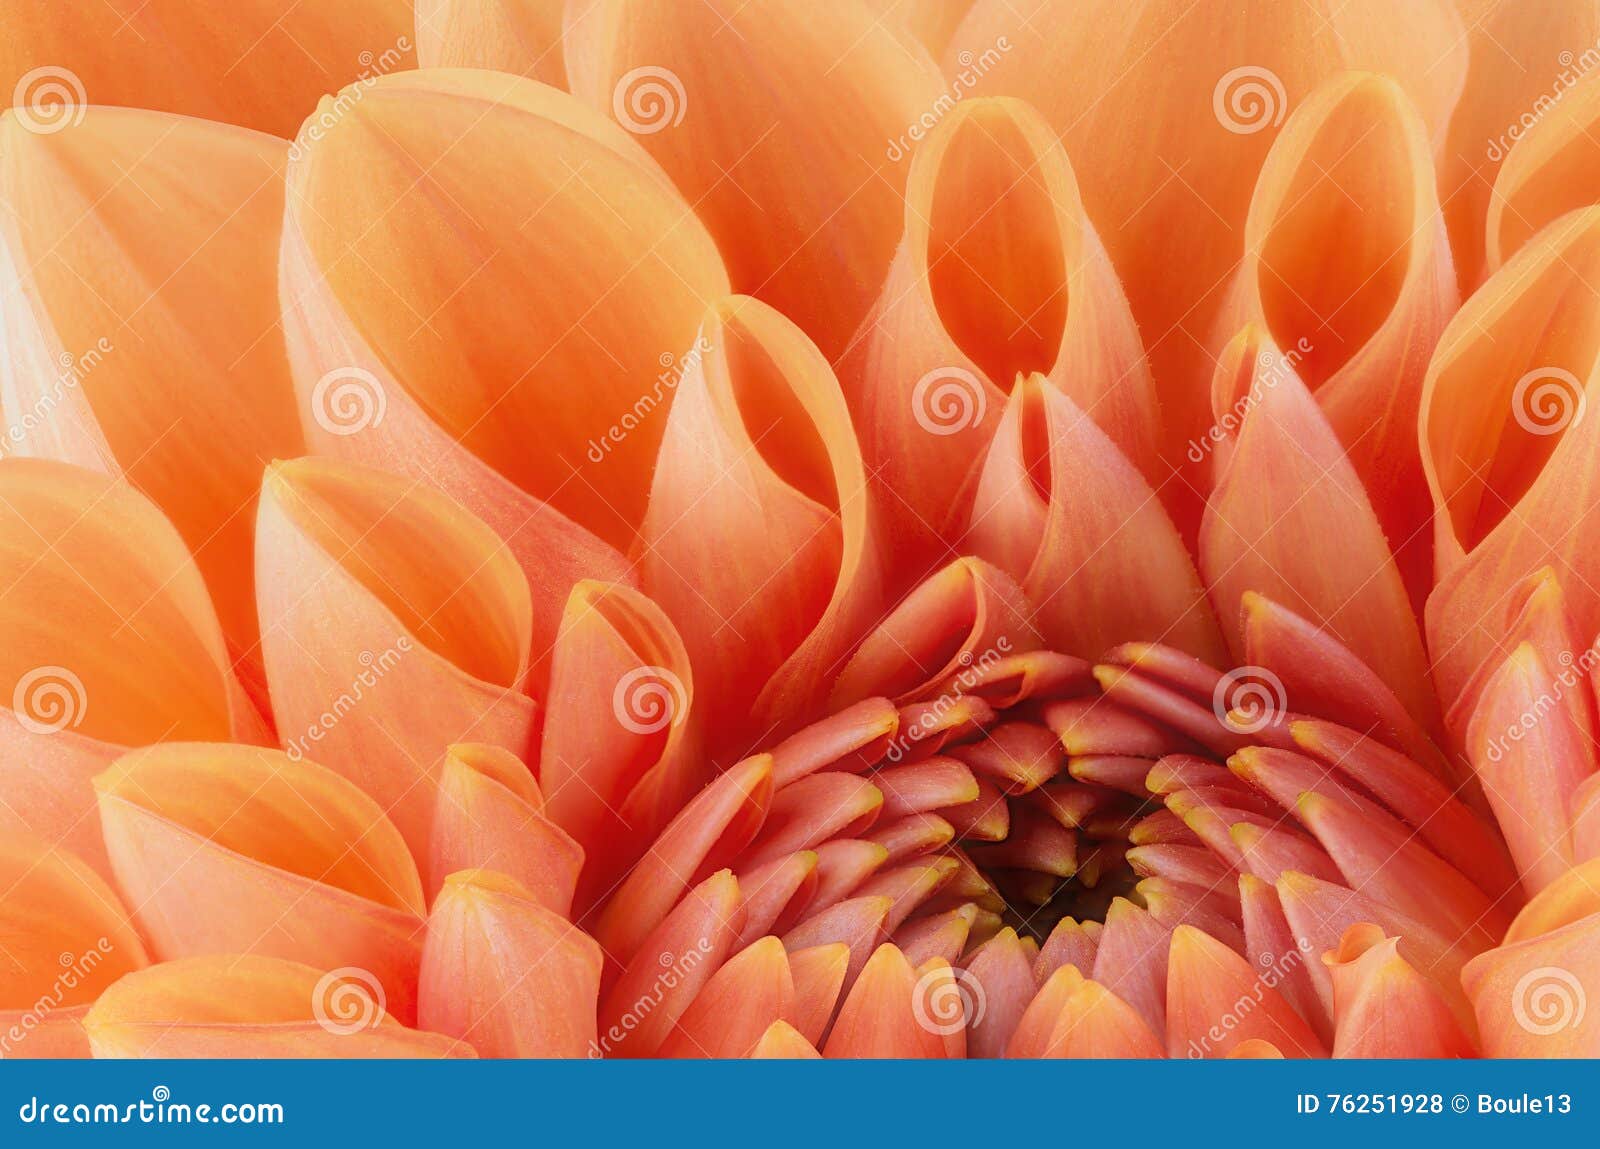 orange flower petals, close up and macro of chrysanthemum, beautiful abstract background